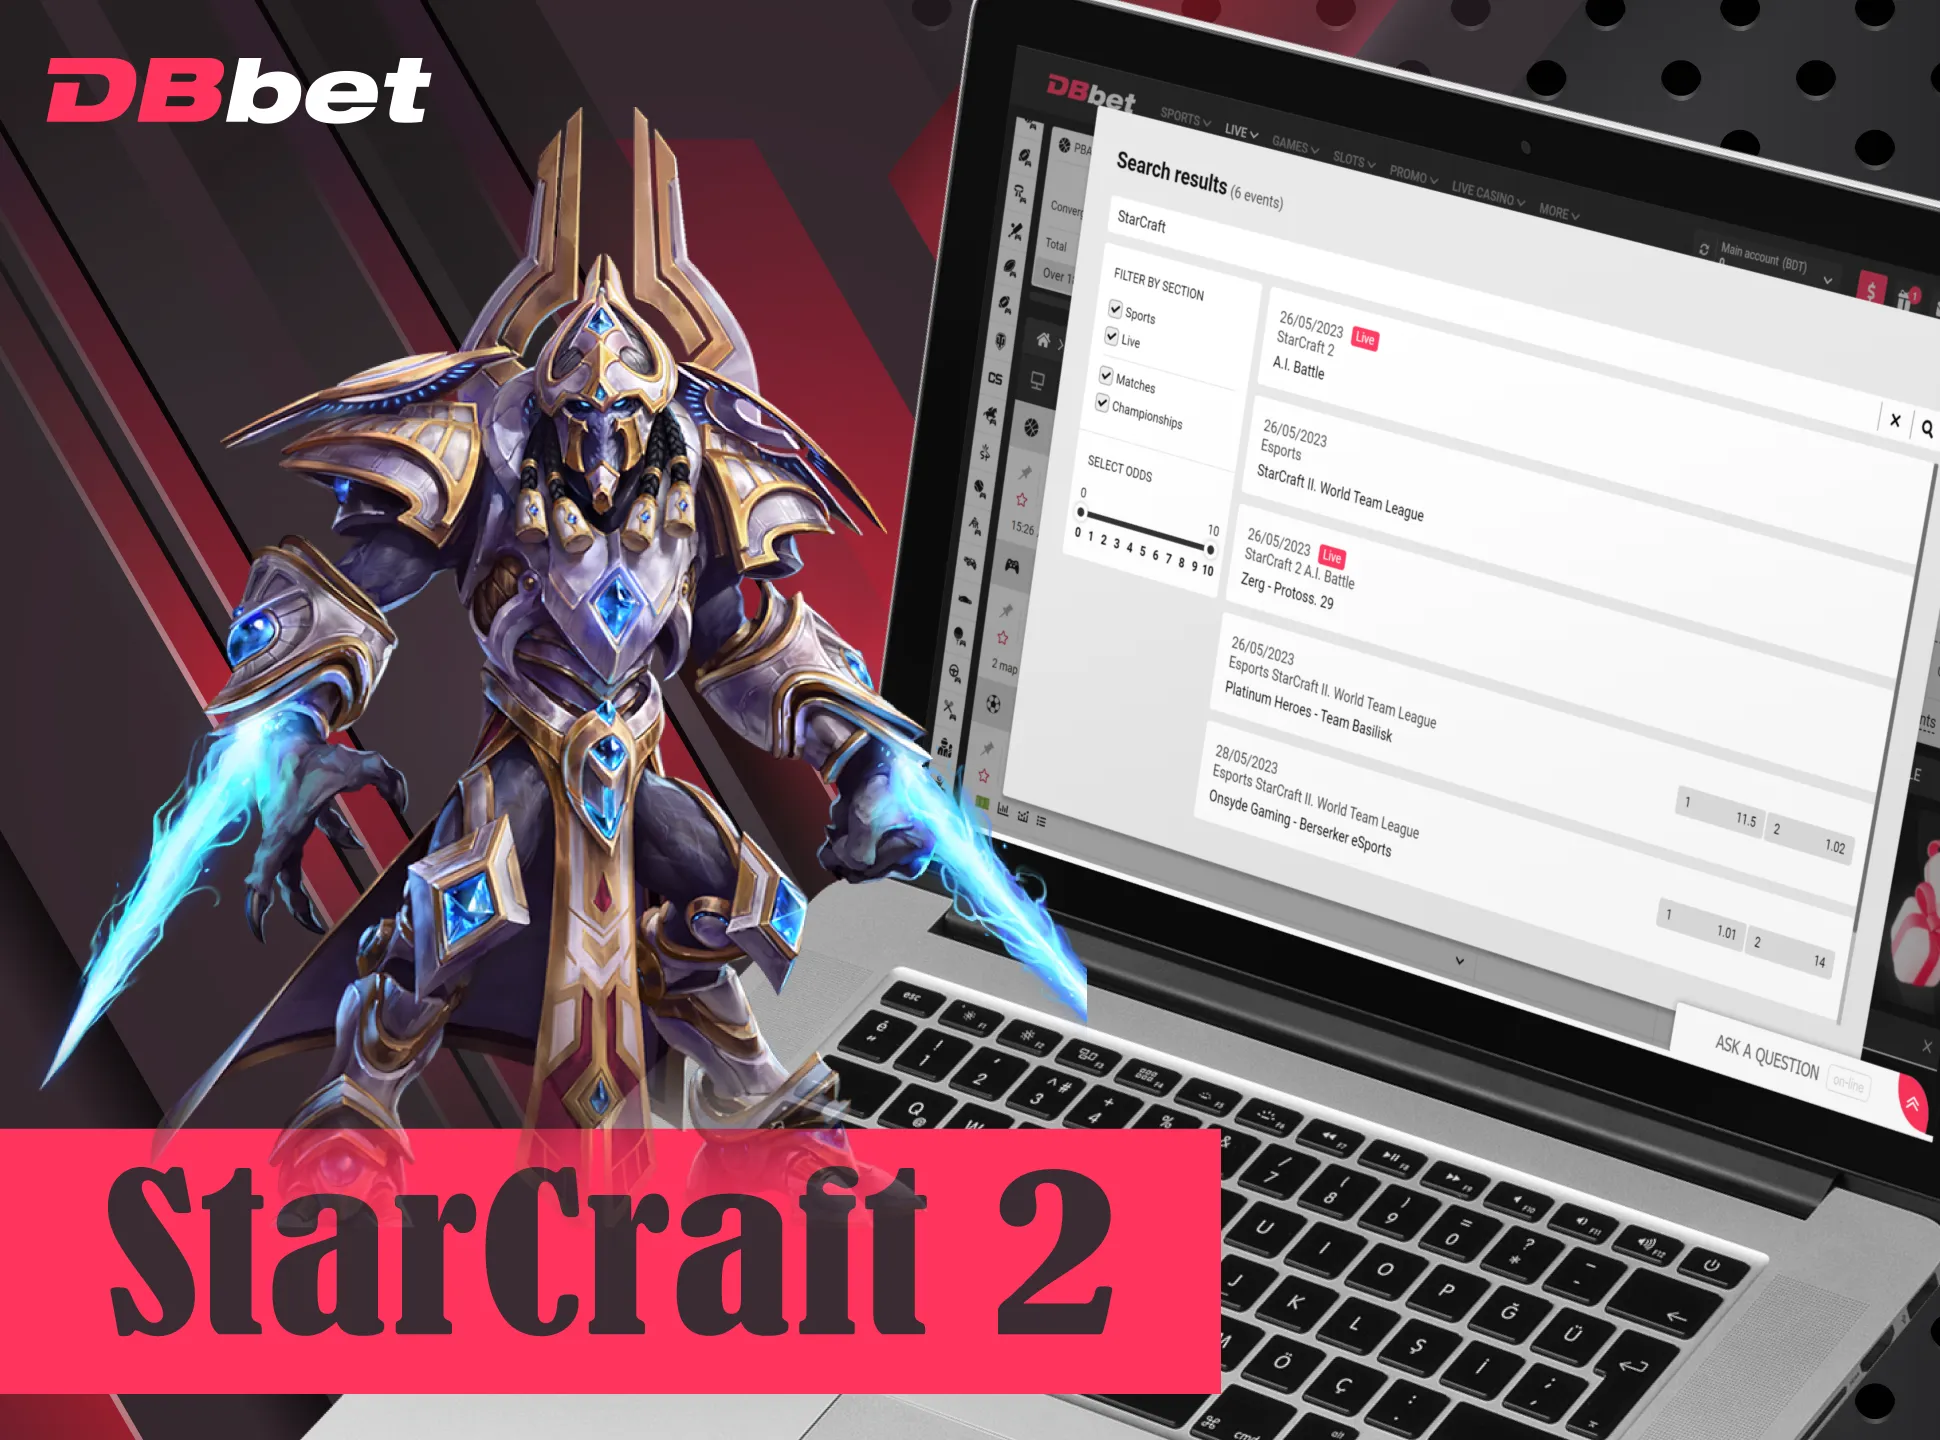 Bet on Starcraft 2 games and win money.